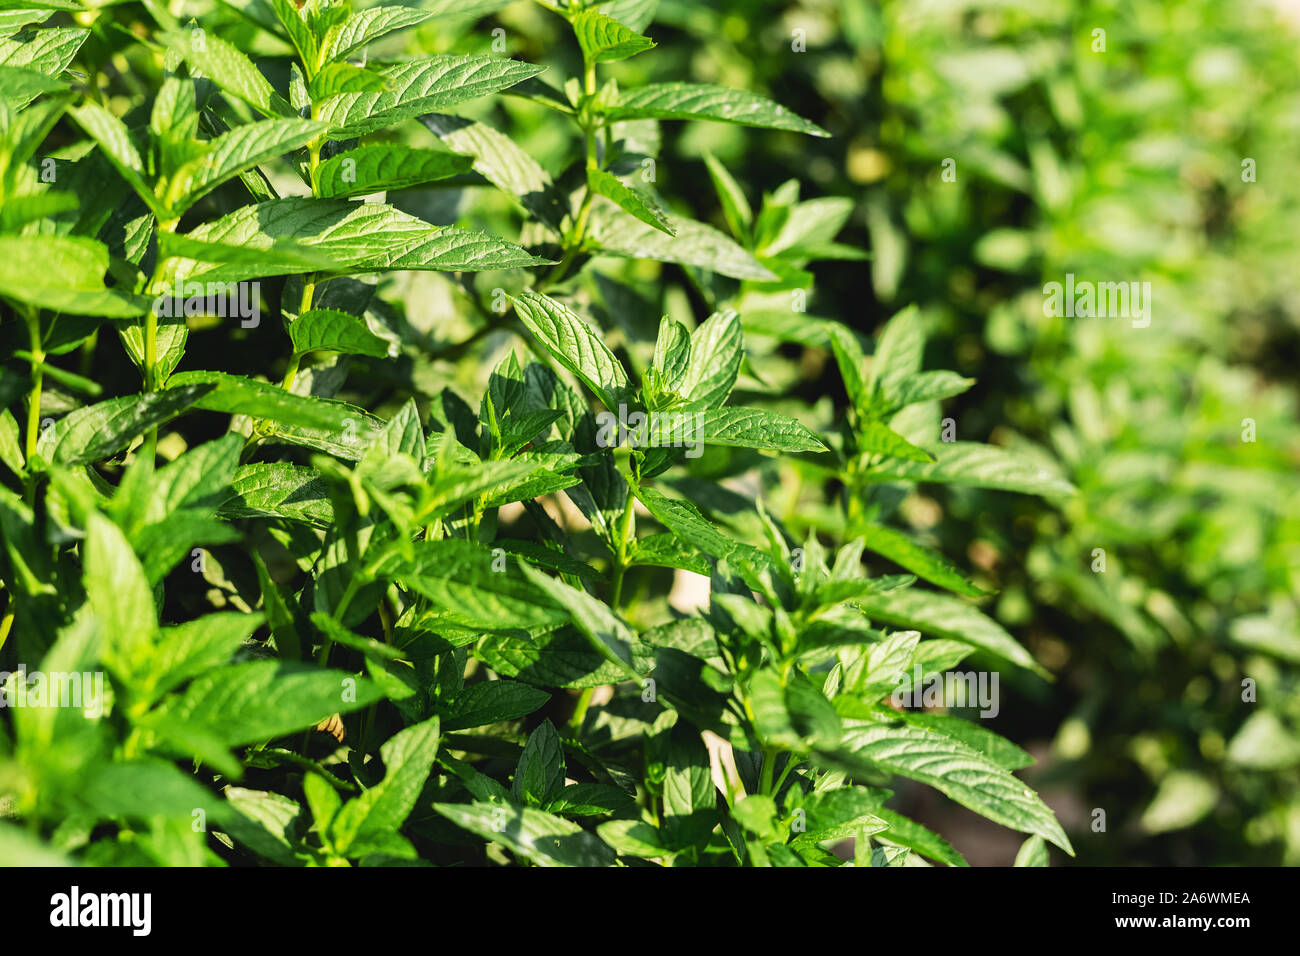 Green fresh Mint Plant Grow Background. Peppermint leaves pattern layout with spearmint herbs. Mint leaves harvest for food, cocktails, mojito, seeds Stock Photo